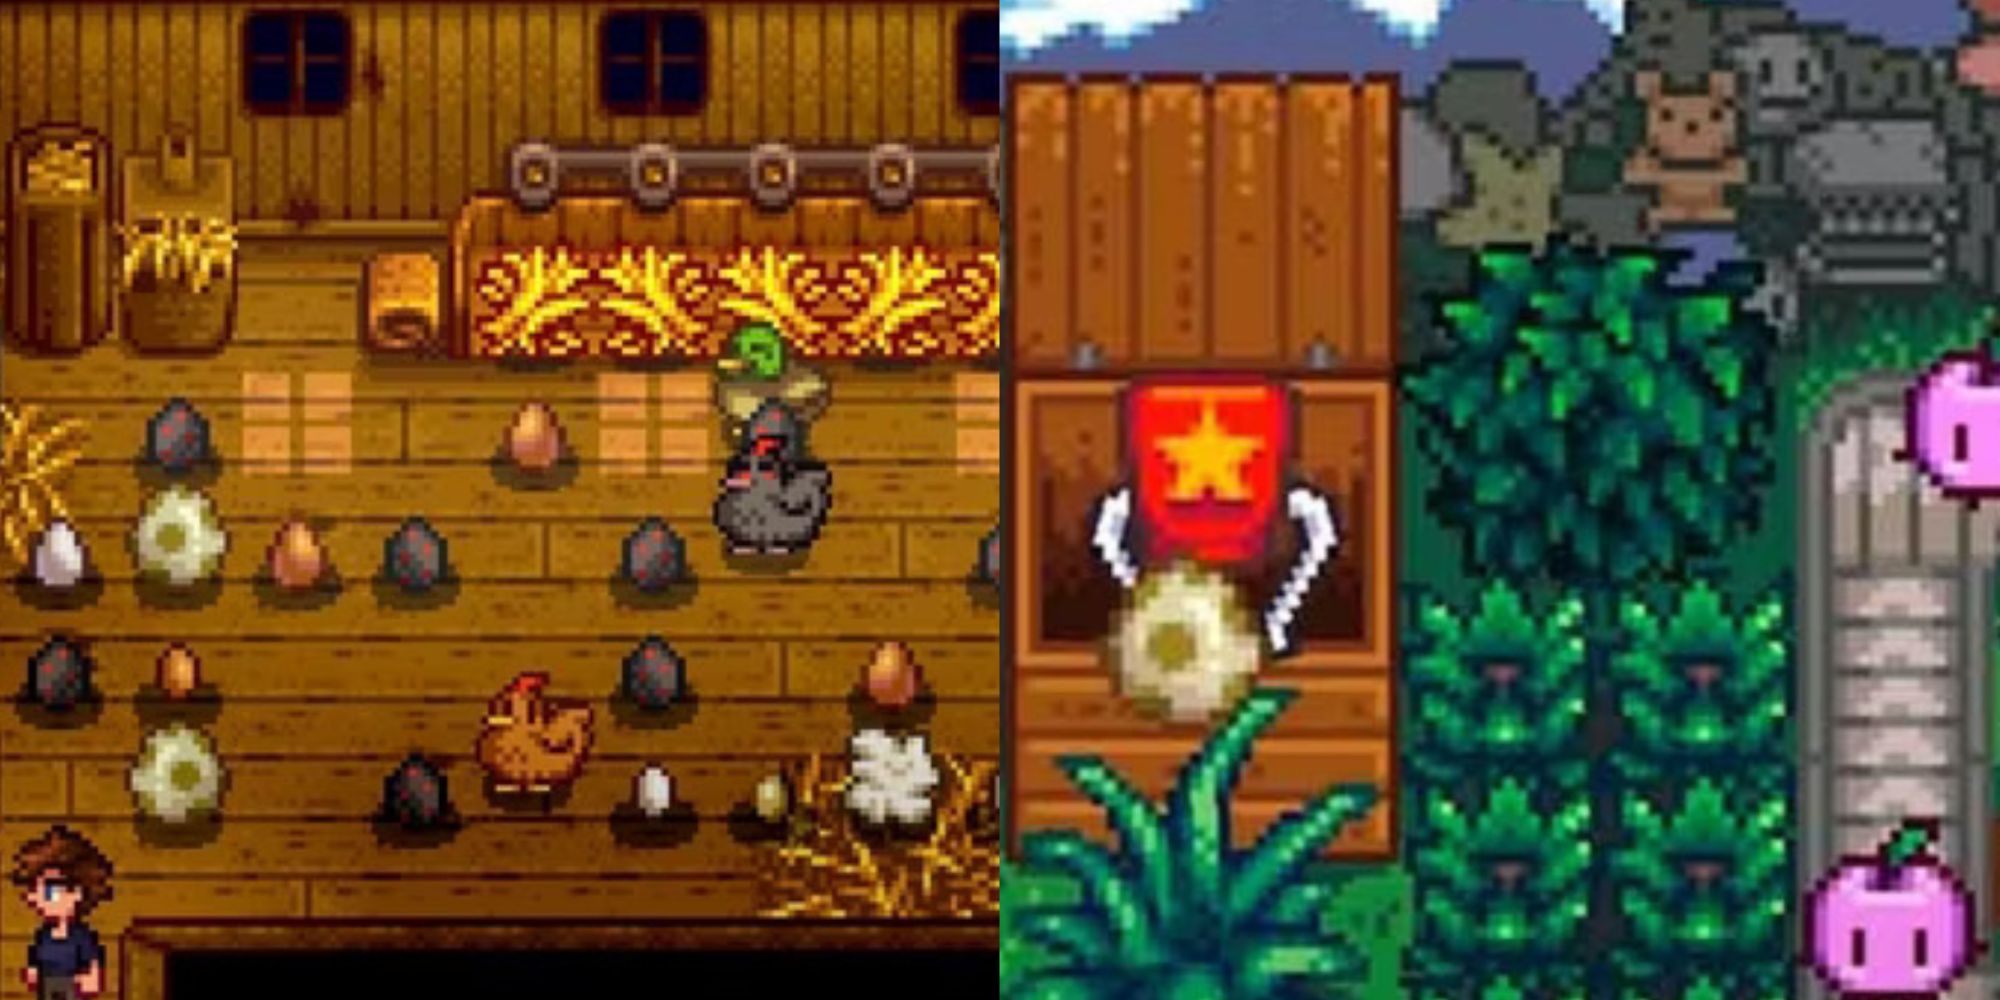 How To Upgrade Your House In Stardew Valley